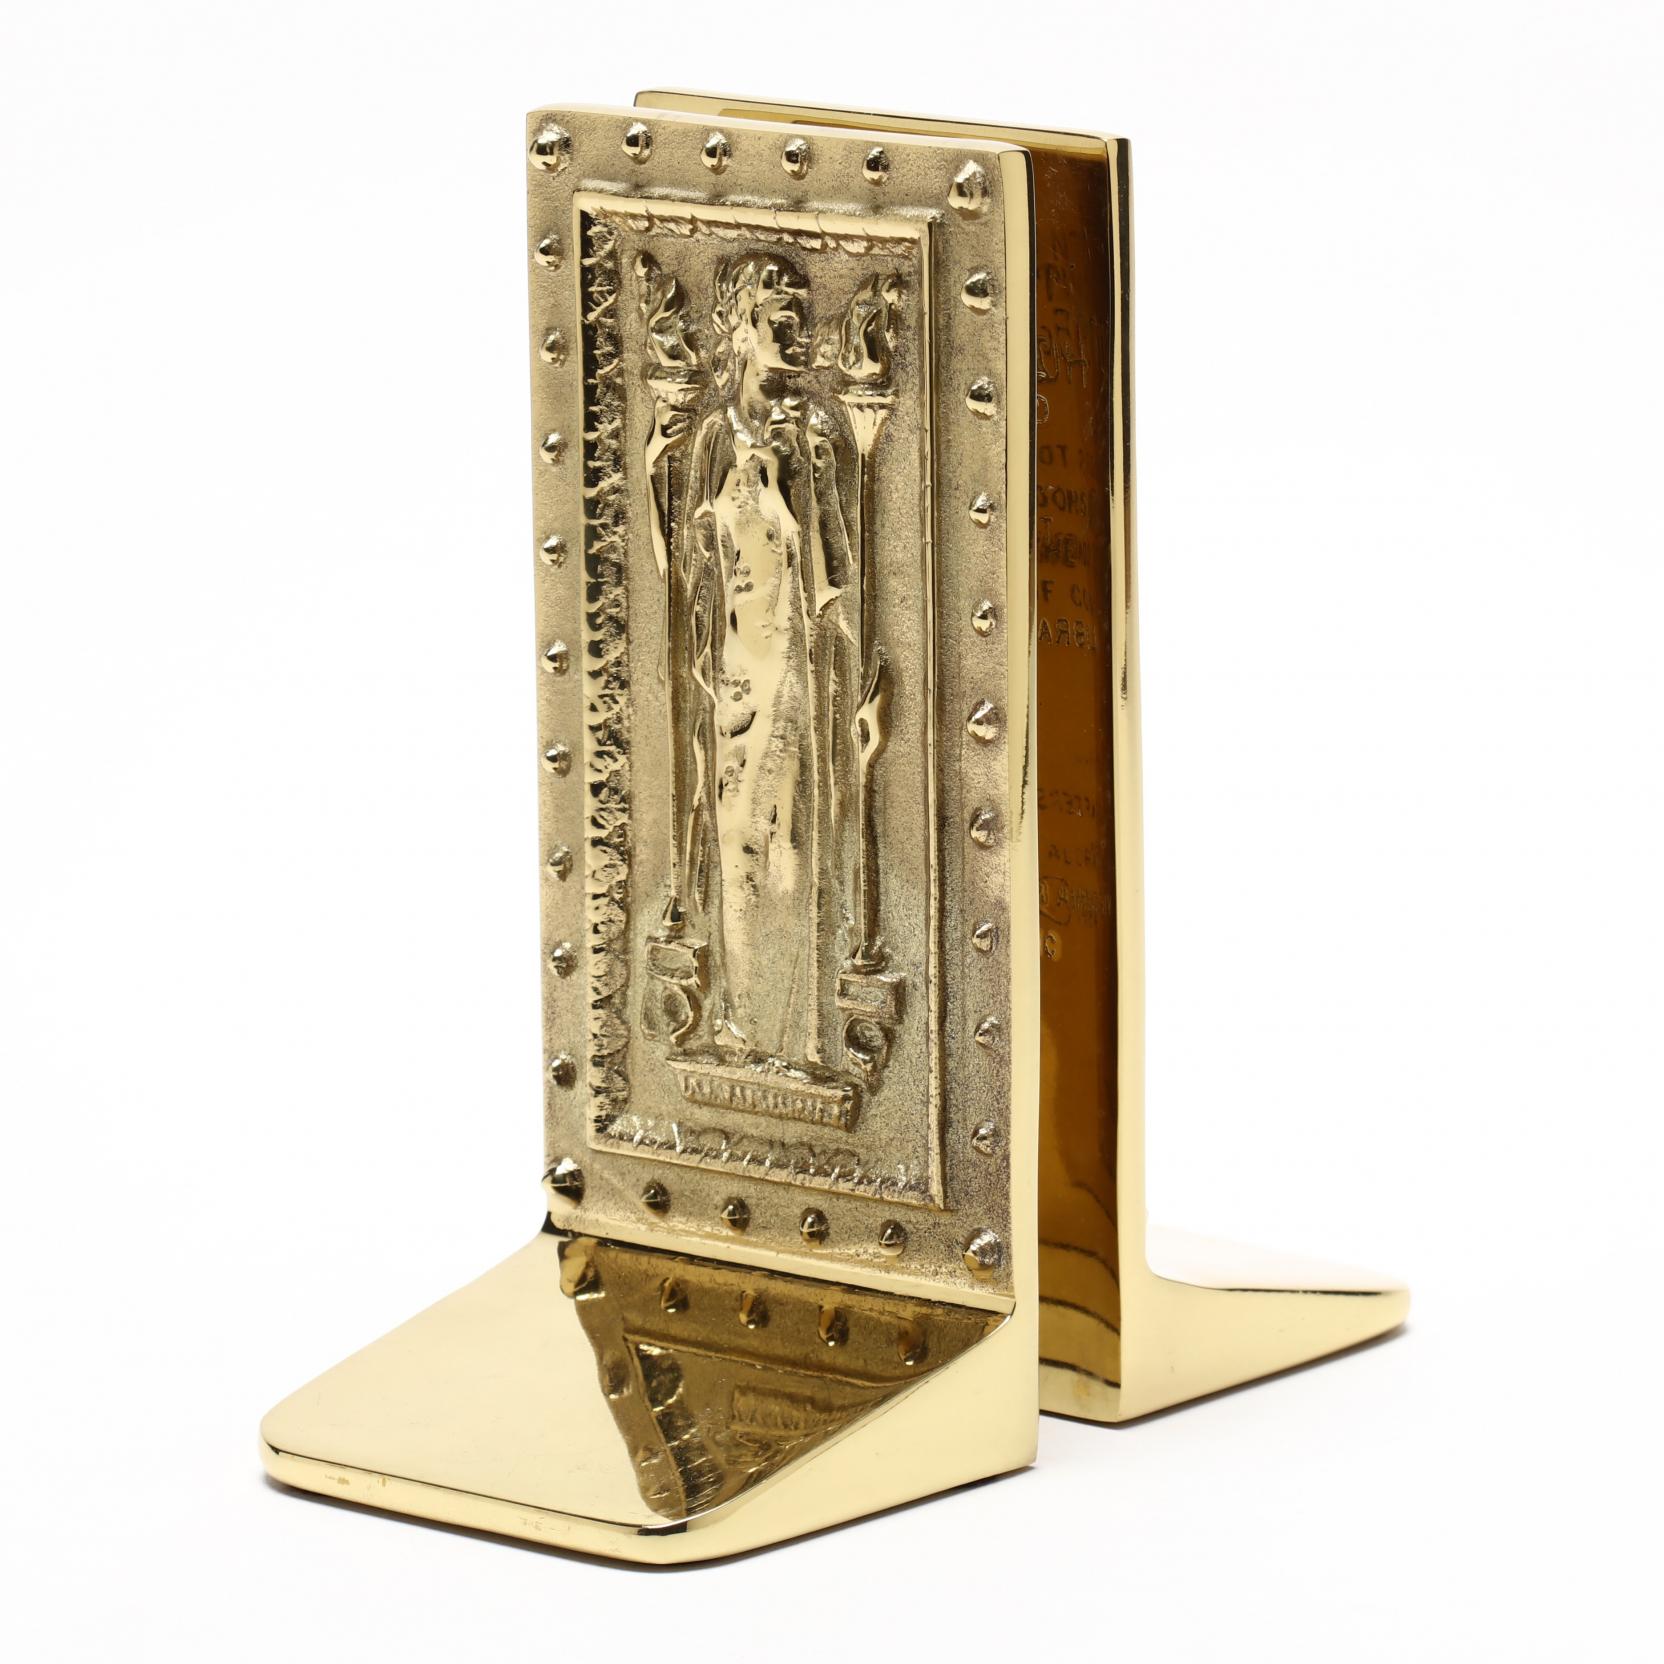 Pair of Rare Solid Brass Libertas and Justitia Bookends by Virginia  Metalcrafters at 1stDibs